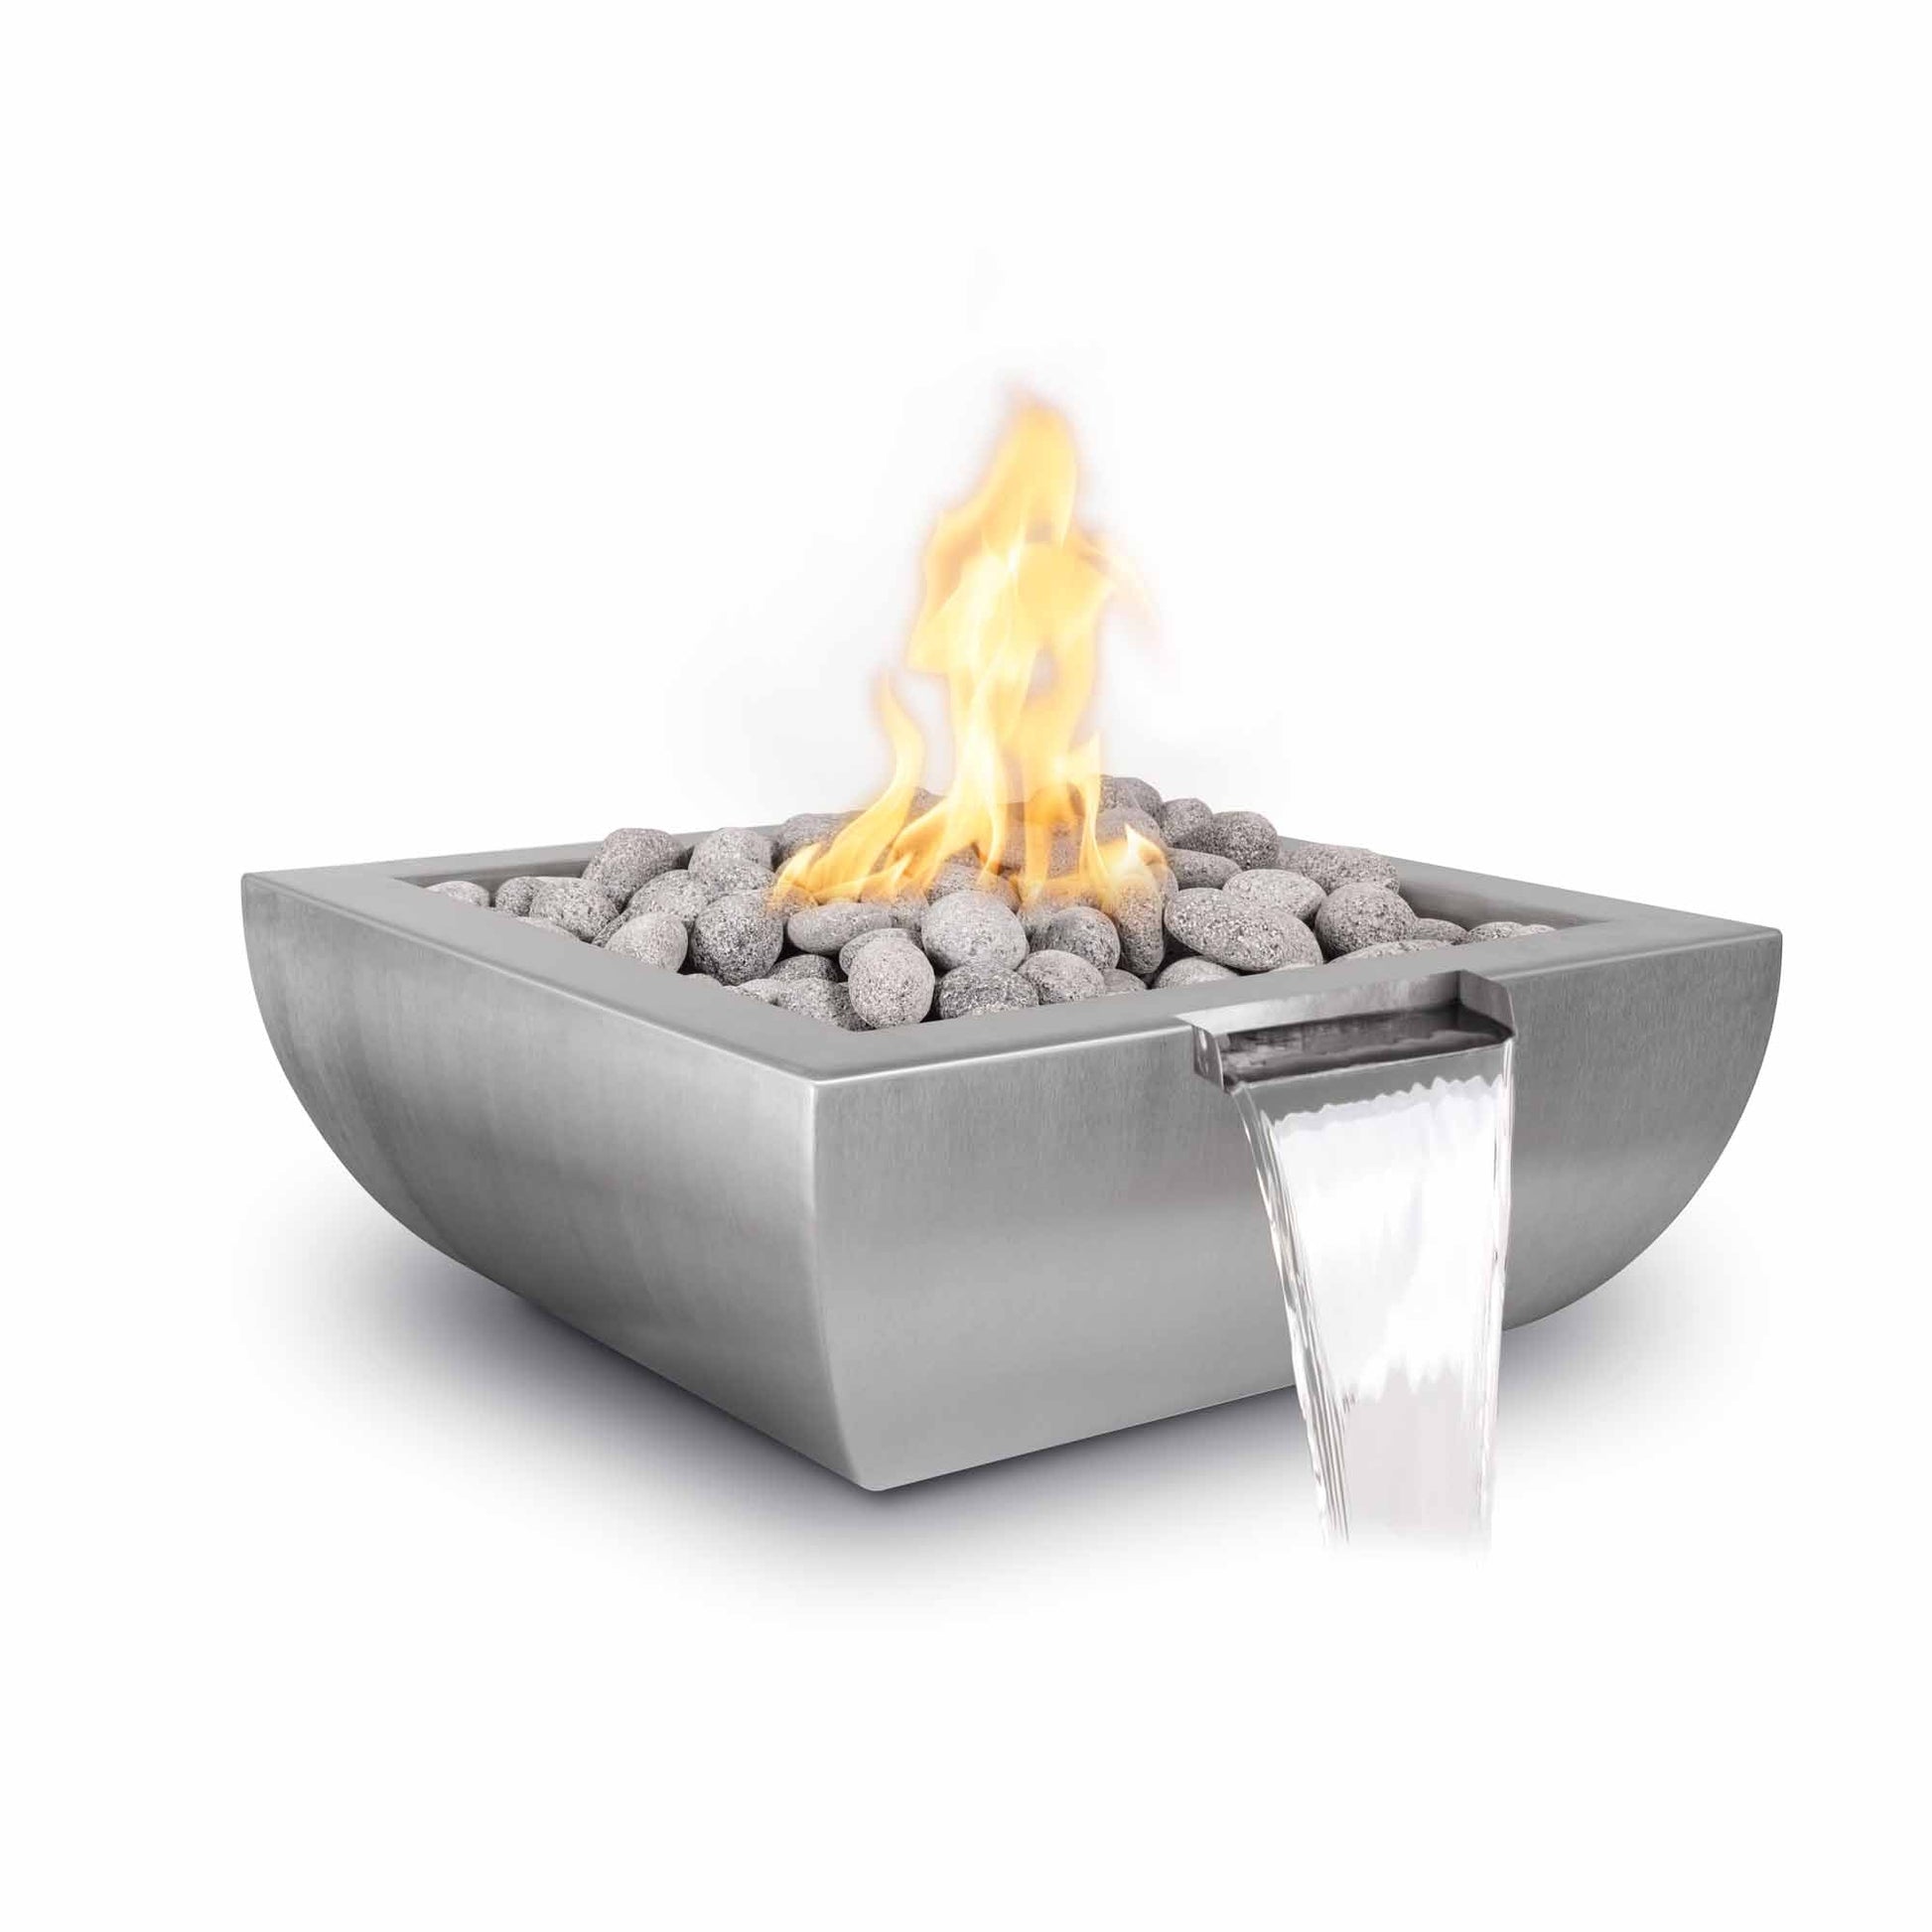 The Outdoor Plus Square Avalon 24" Hammered Copper Natural Gas Fire & Water Bowl with Match Lit with Flame Sense Ignition